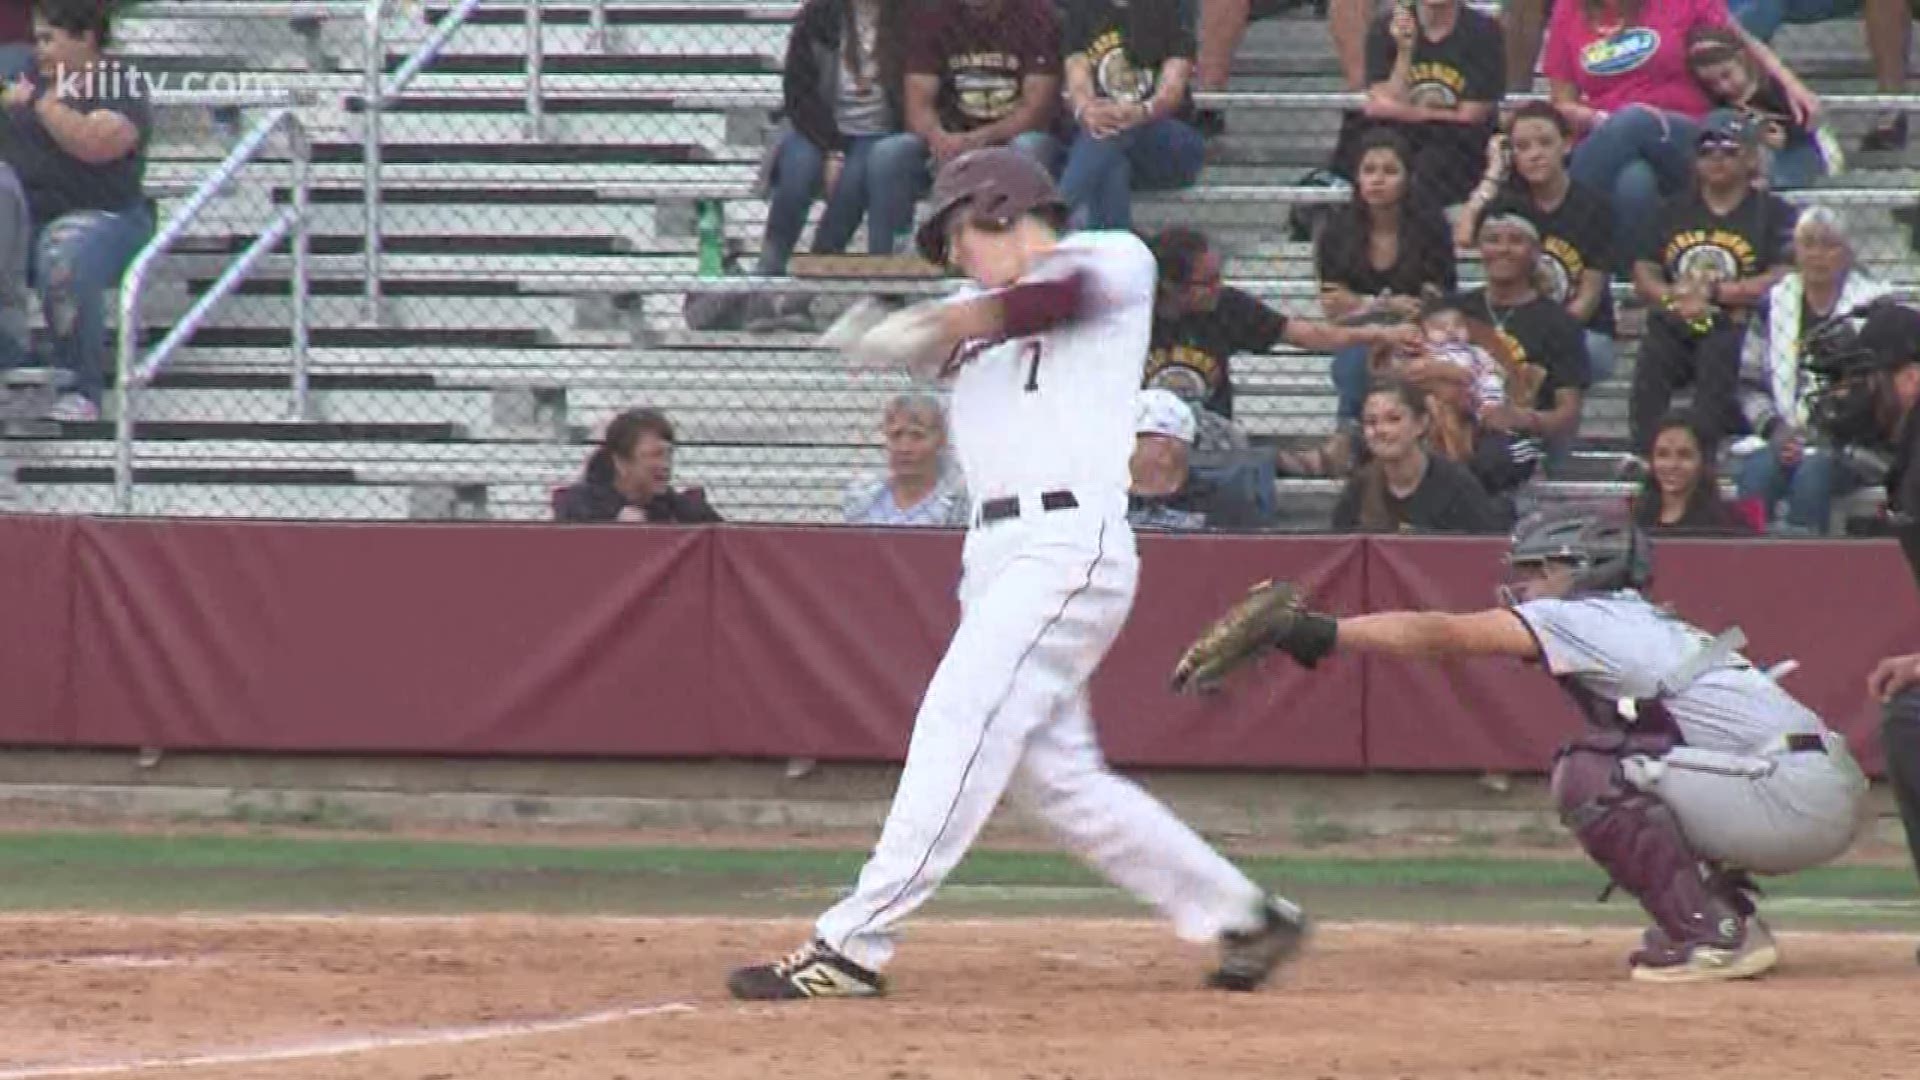 Highlights from our Co-Game's of the Week: Calallen vs. Tuloso-Midway baseball and softball. Plus, highlights from Carroll and Moody's matchup.